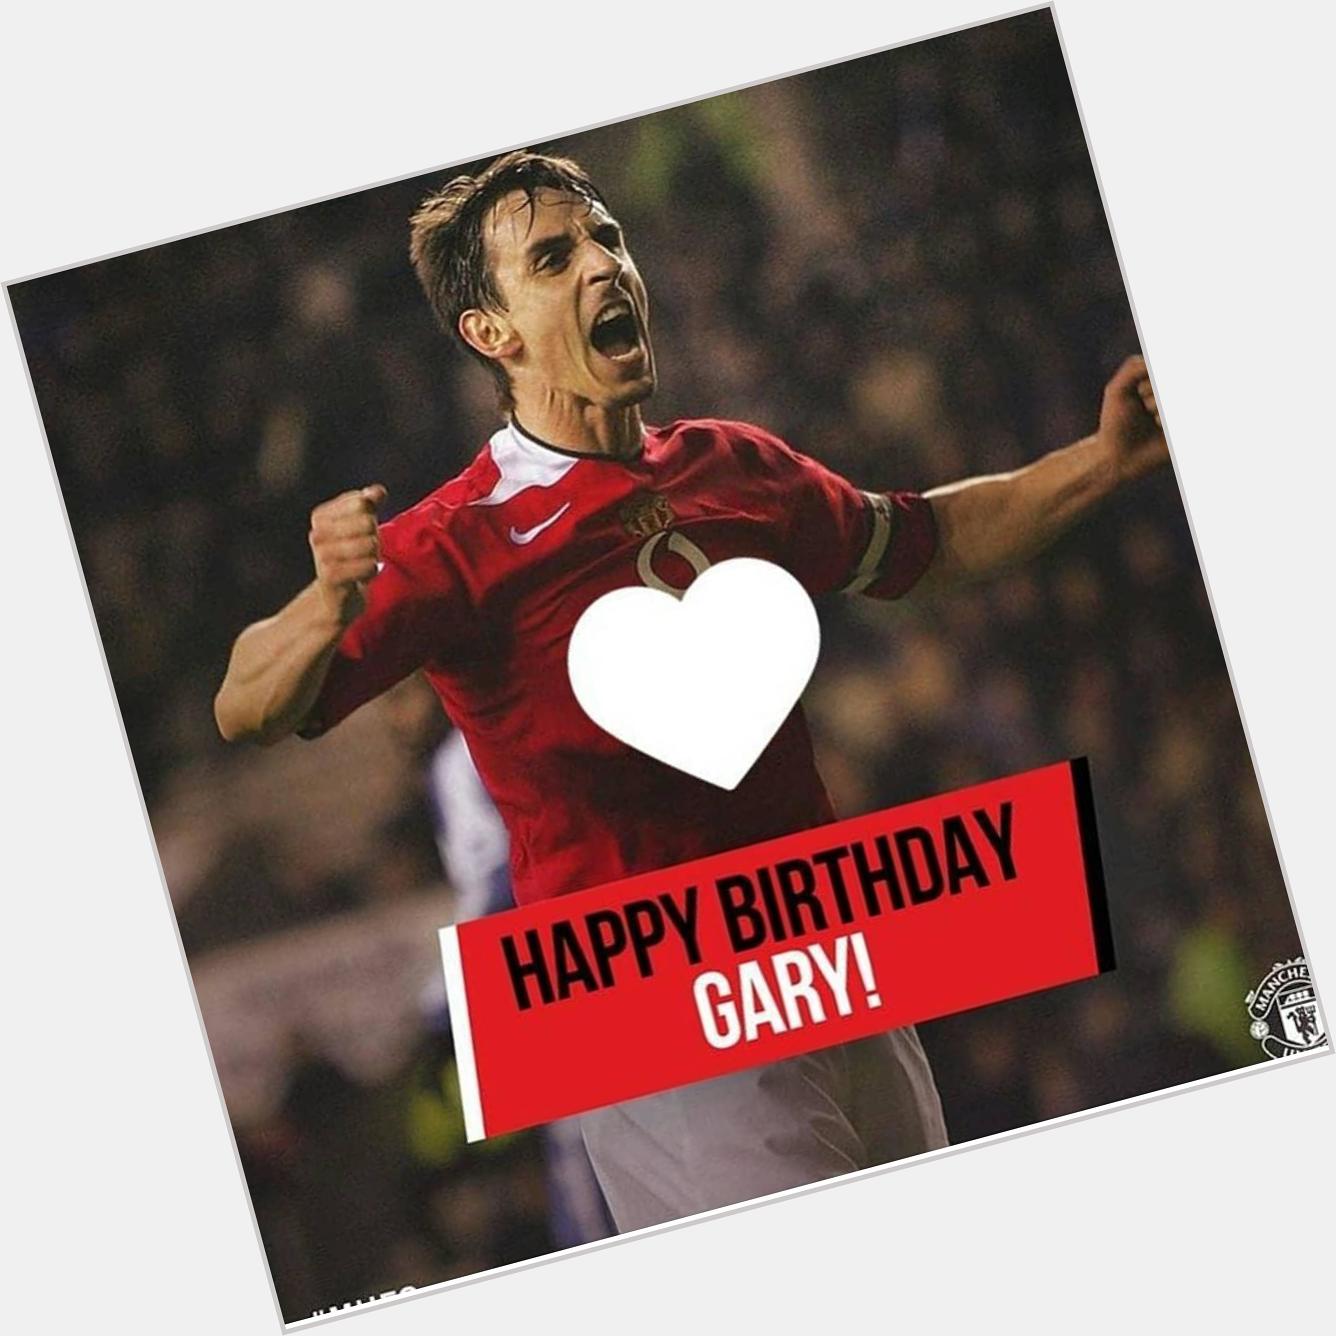 Happy birthday to a true legend and member of the iconic Class of 92, Gary Neville!  